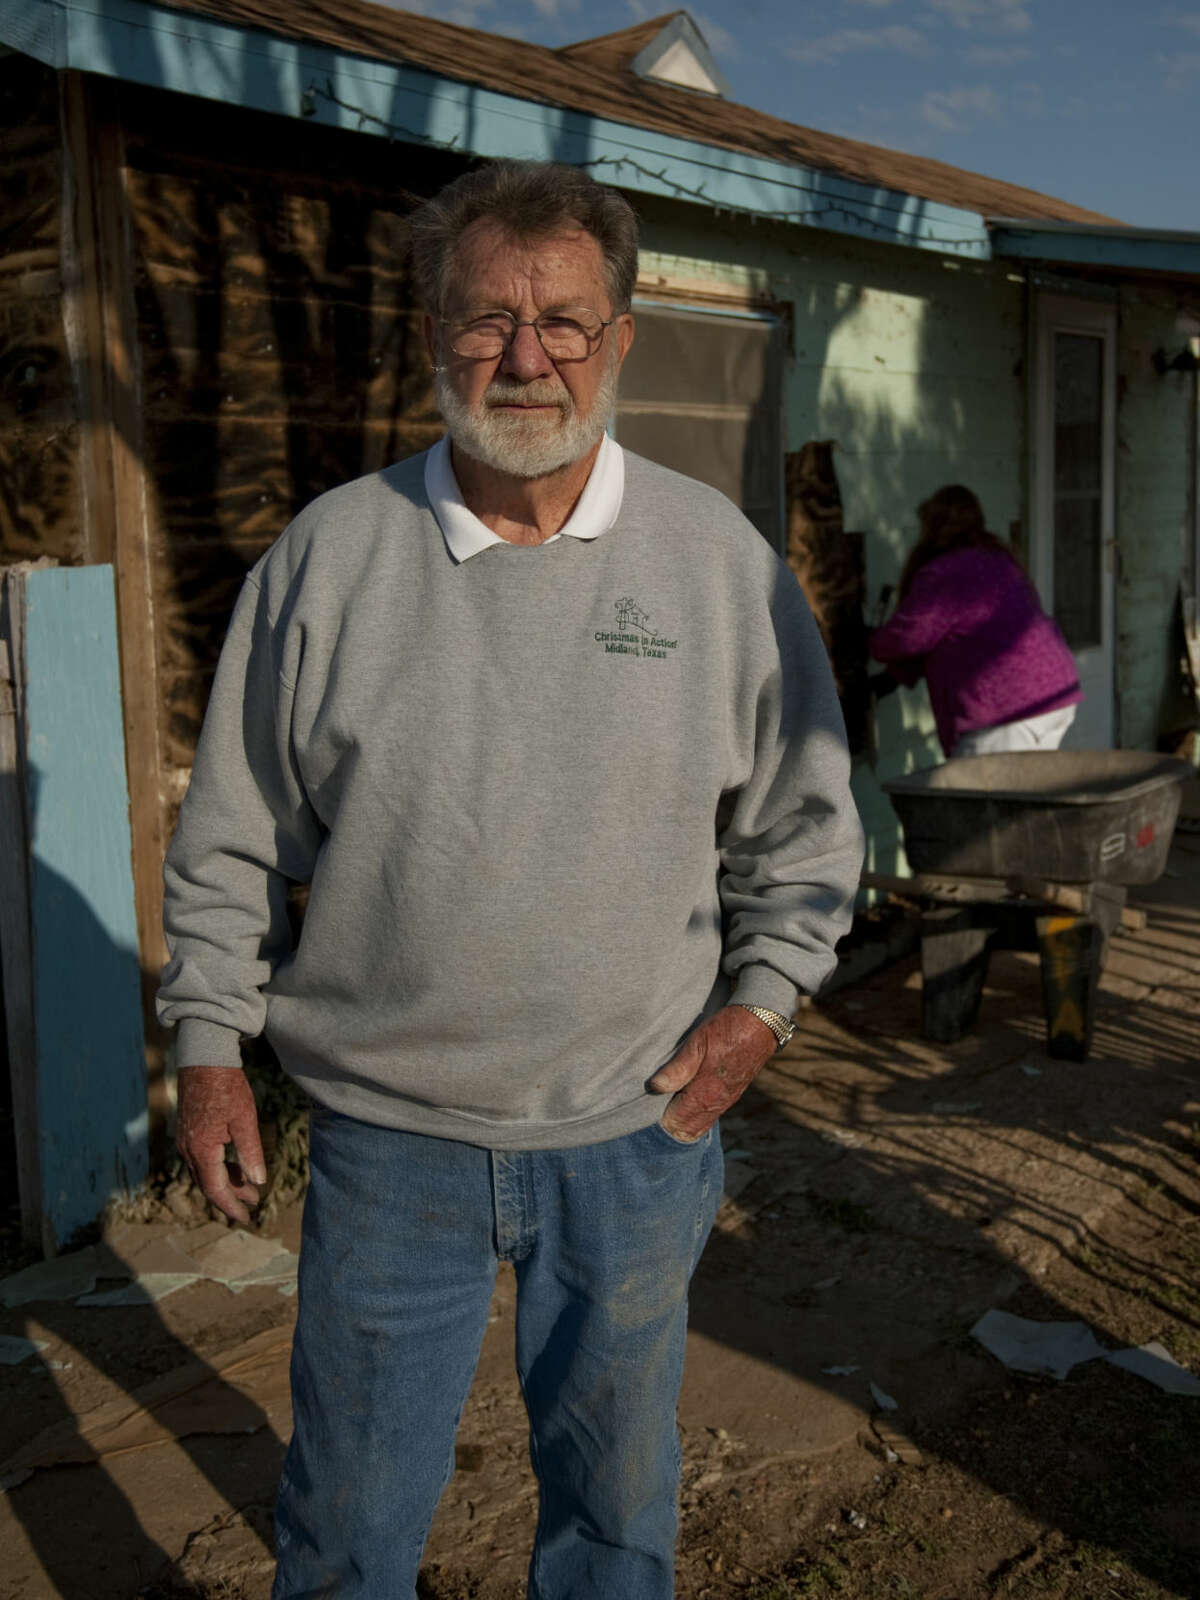 “Midland, Texas, people are some of the most generous people I know. It has the neighbor helping neighbor heart.”